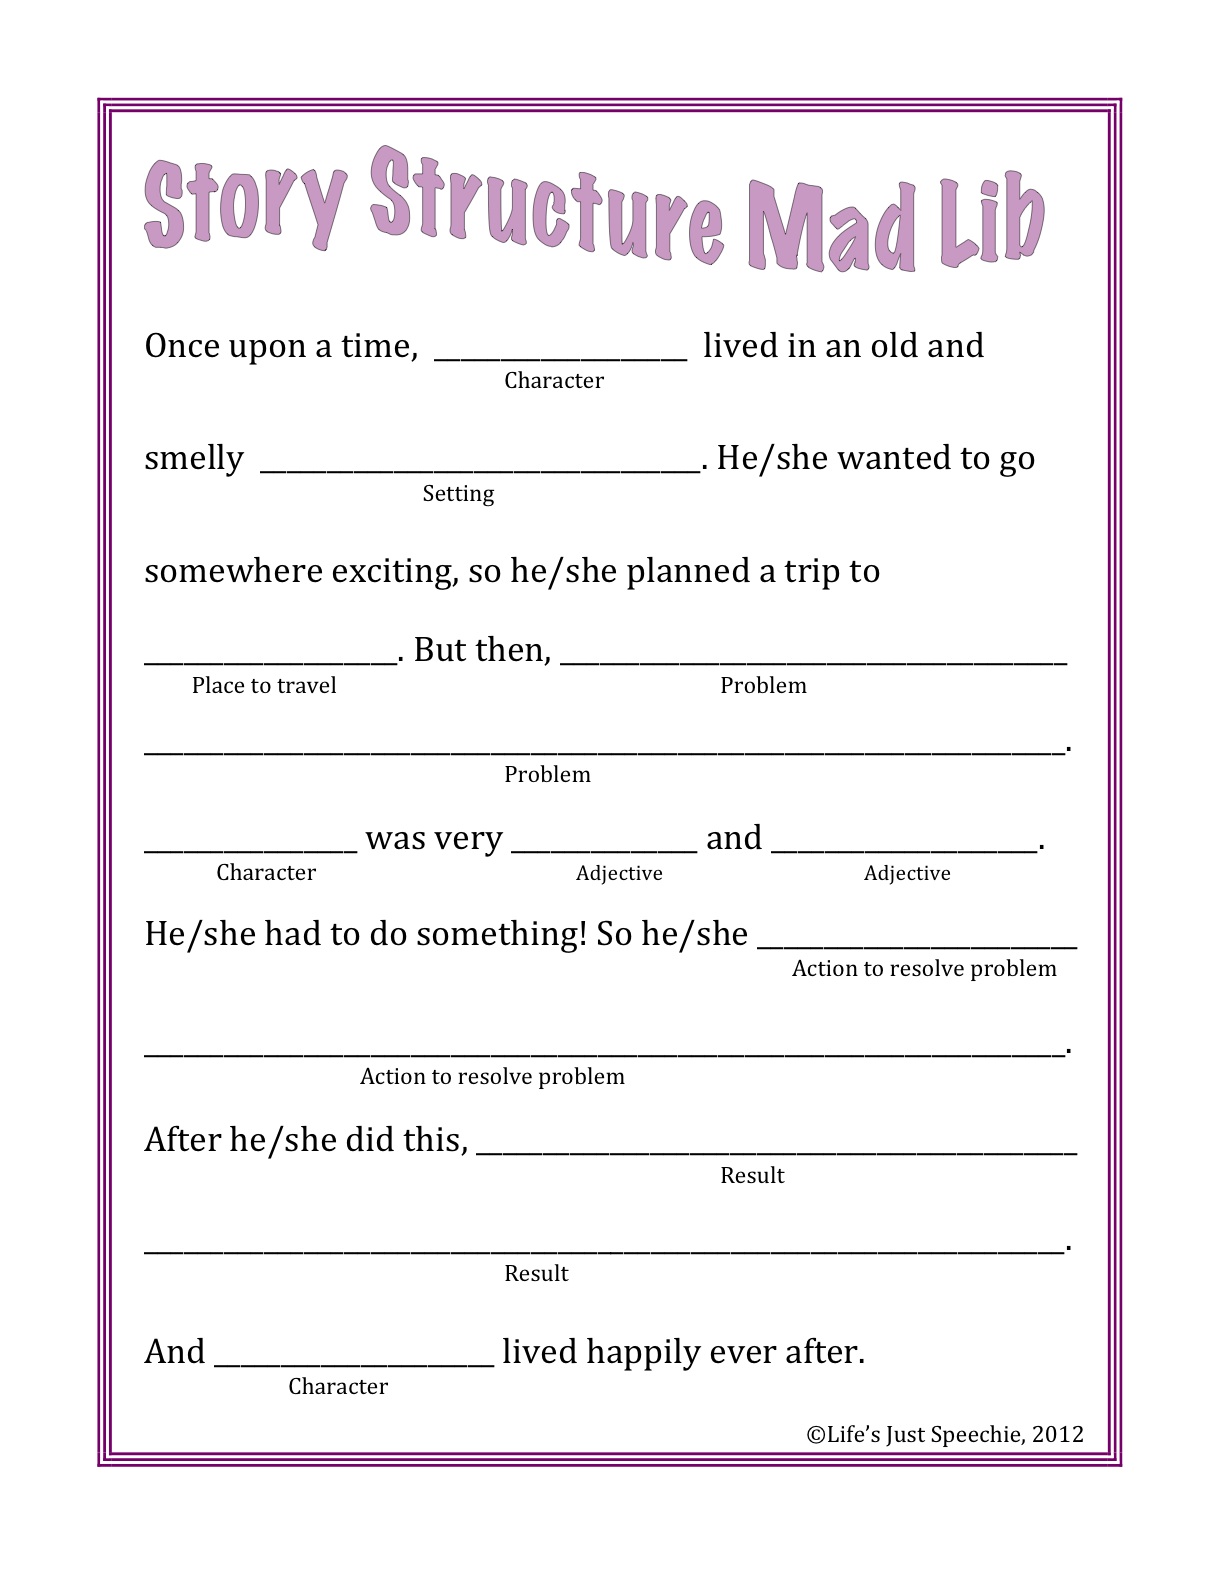 Life Is Just Speechie Story Structure Mad Lib